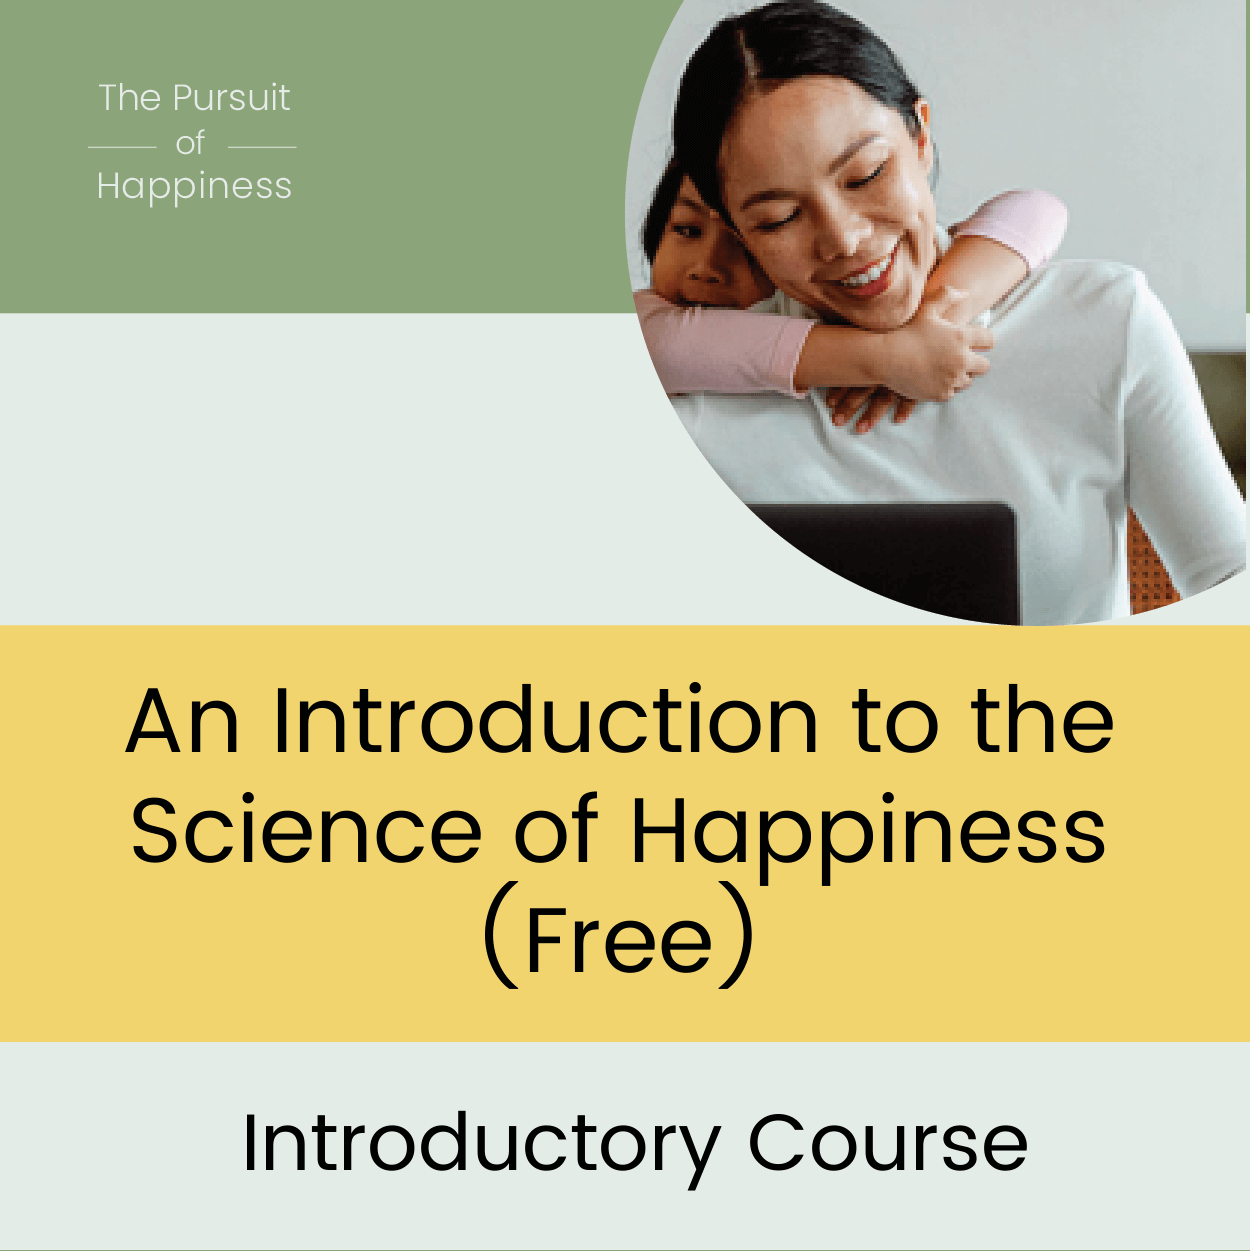 science of happiness intro course